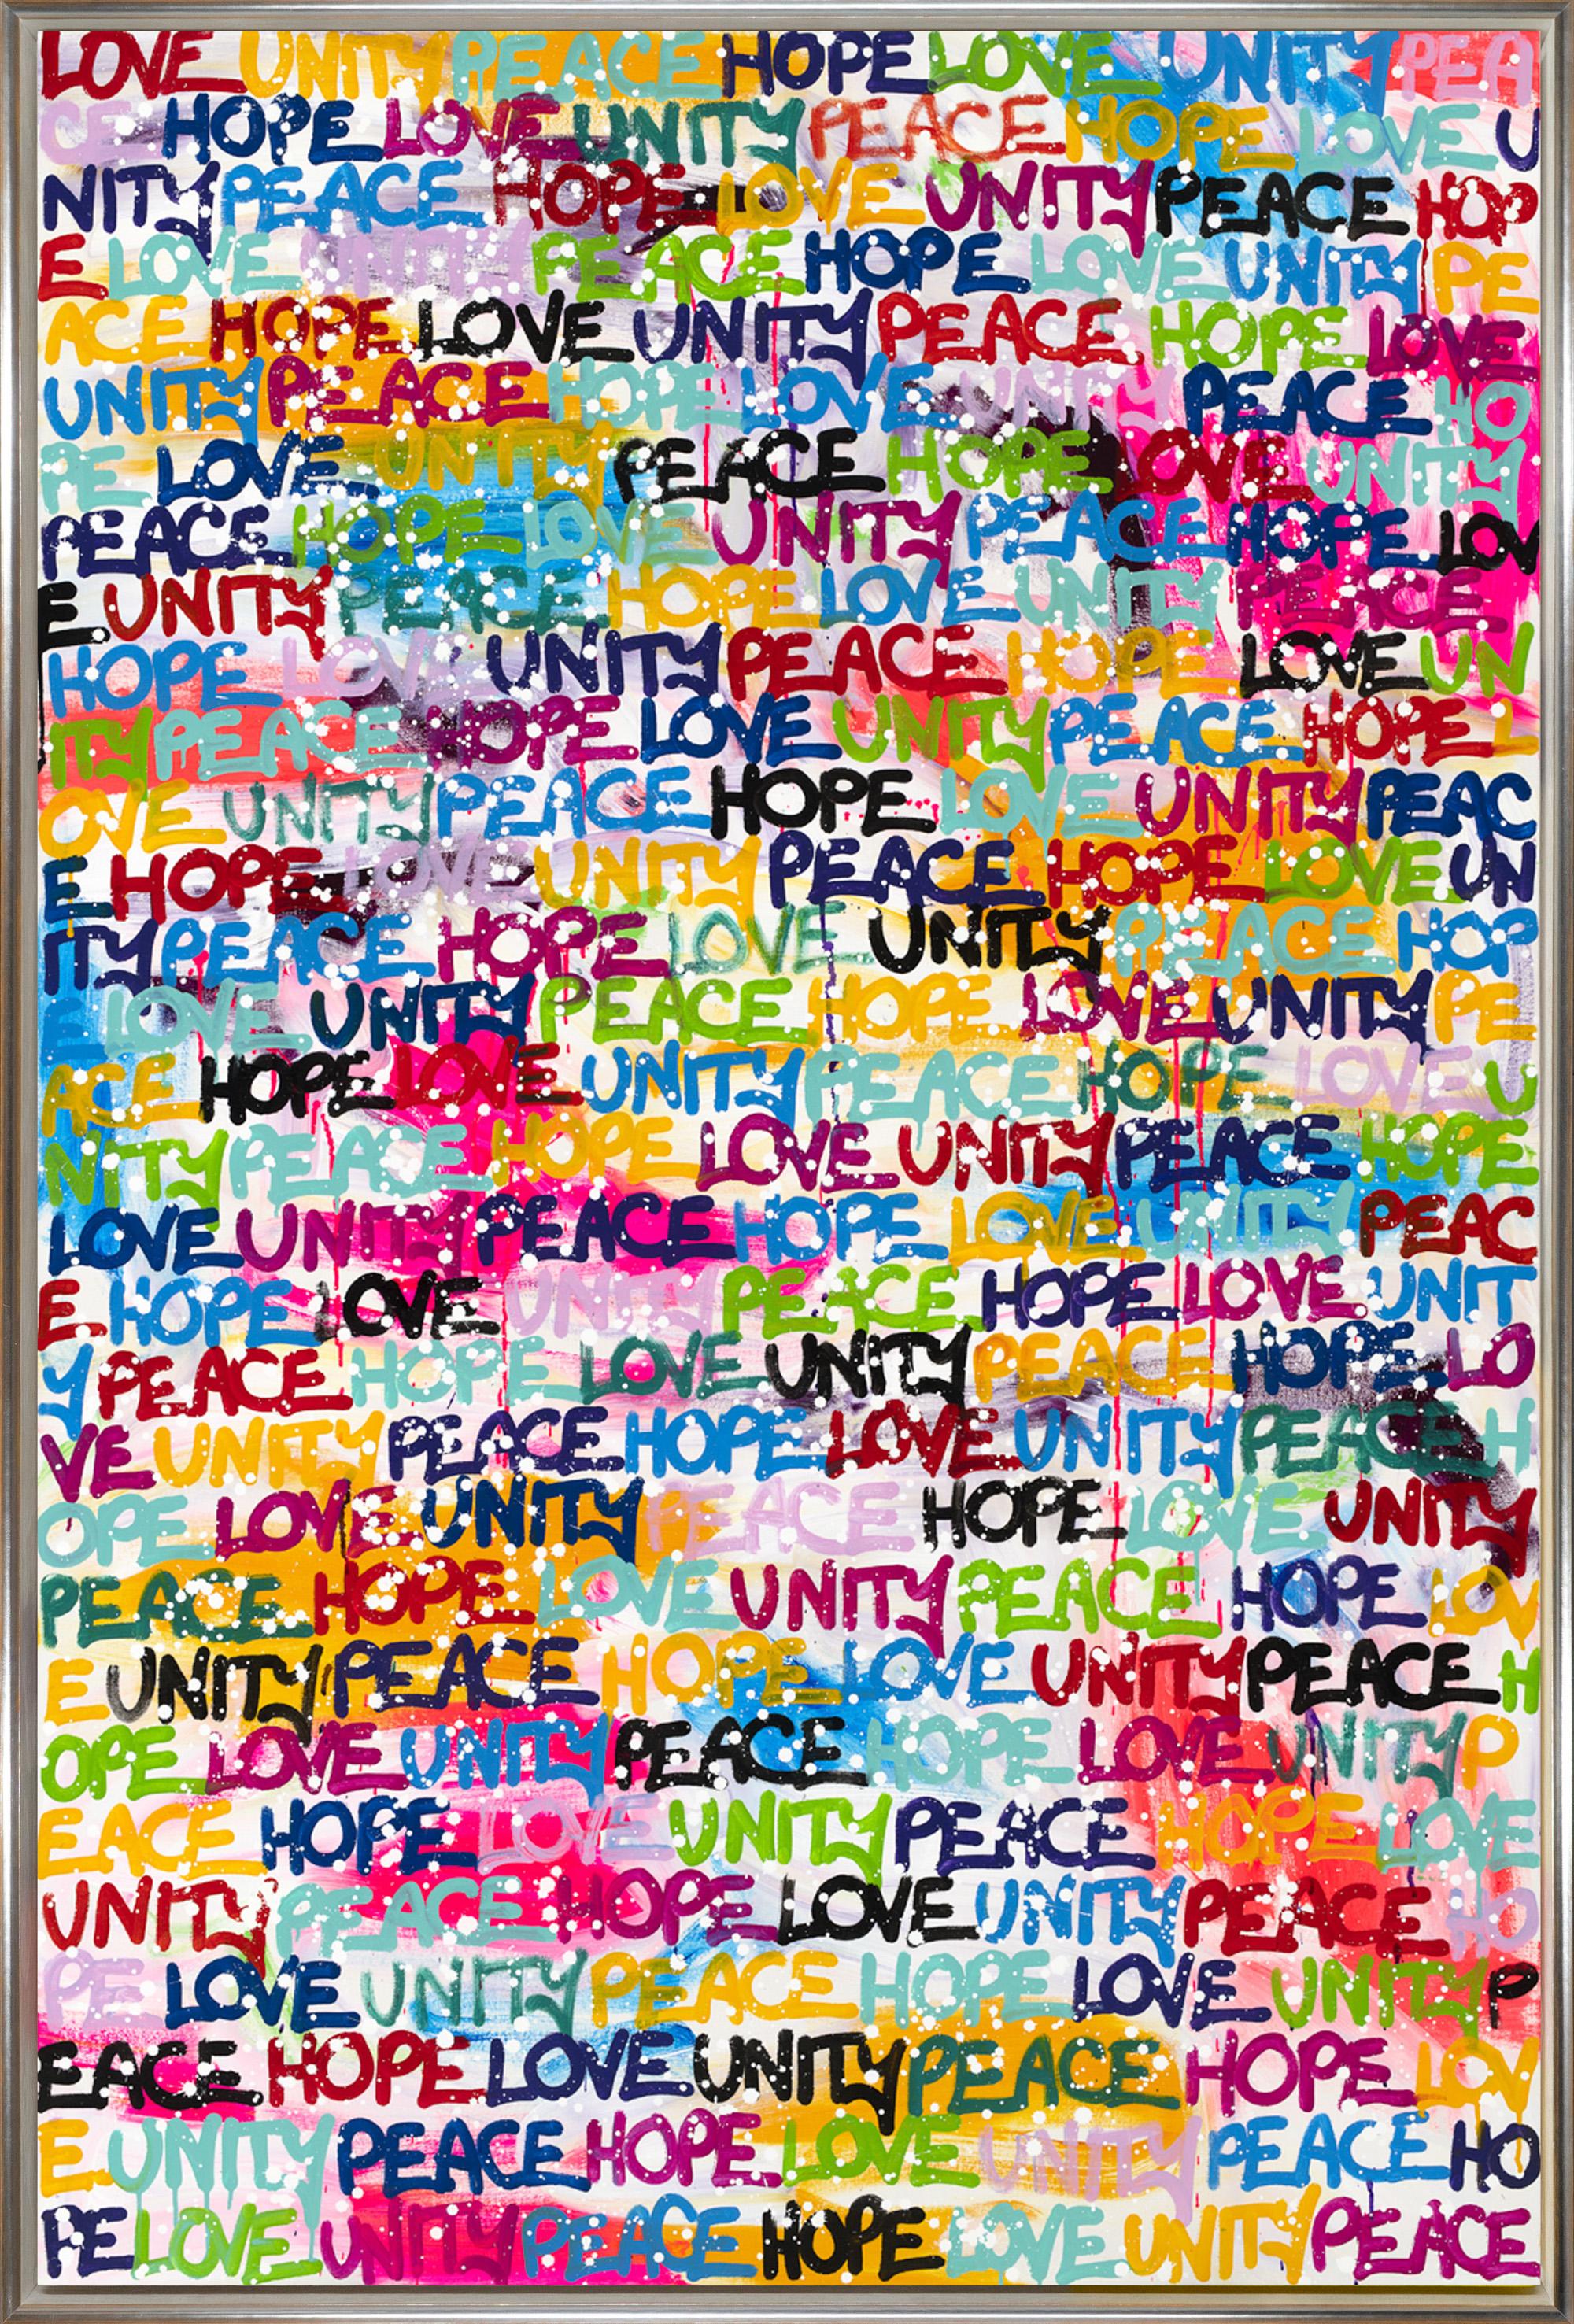 Amber Goldhammer Abstract Painting - "The World's Mantra" Colorful Graffiti Inspired Abstract: Hope Unity Peace Love